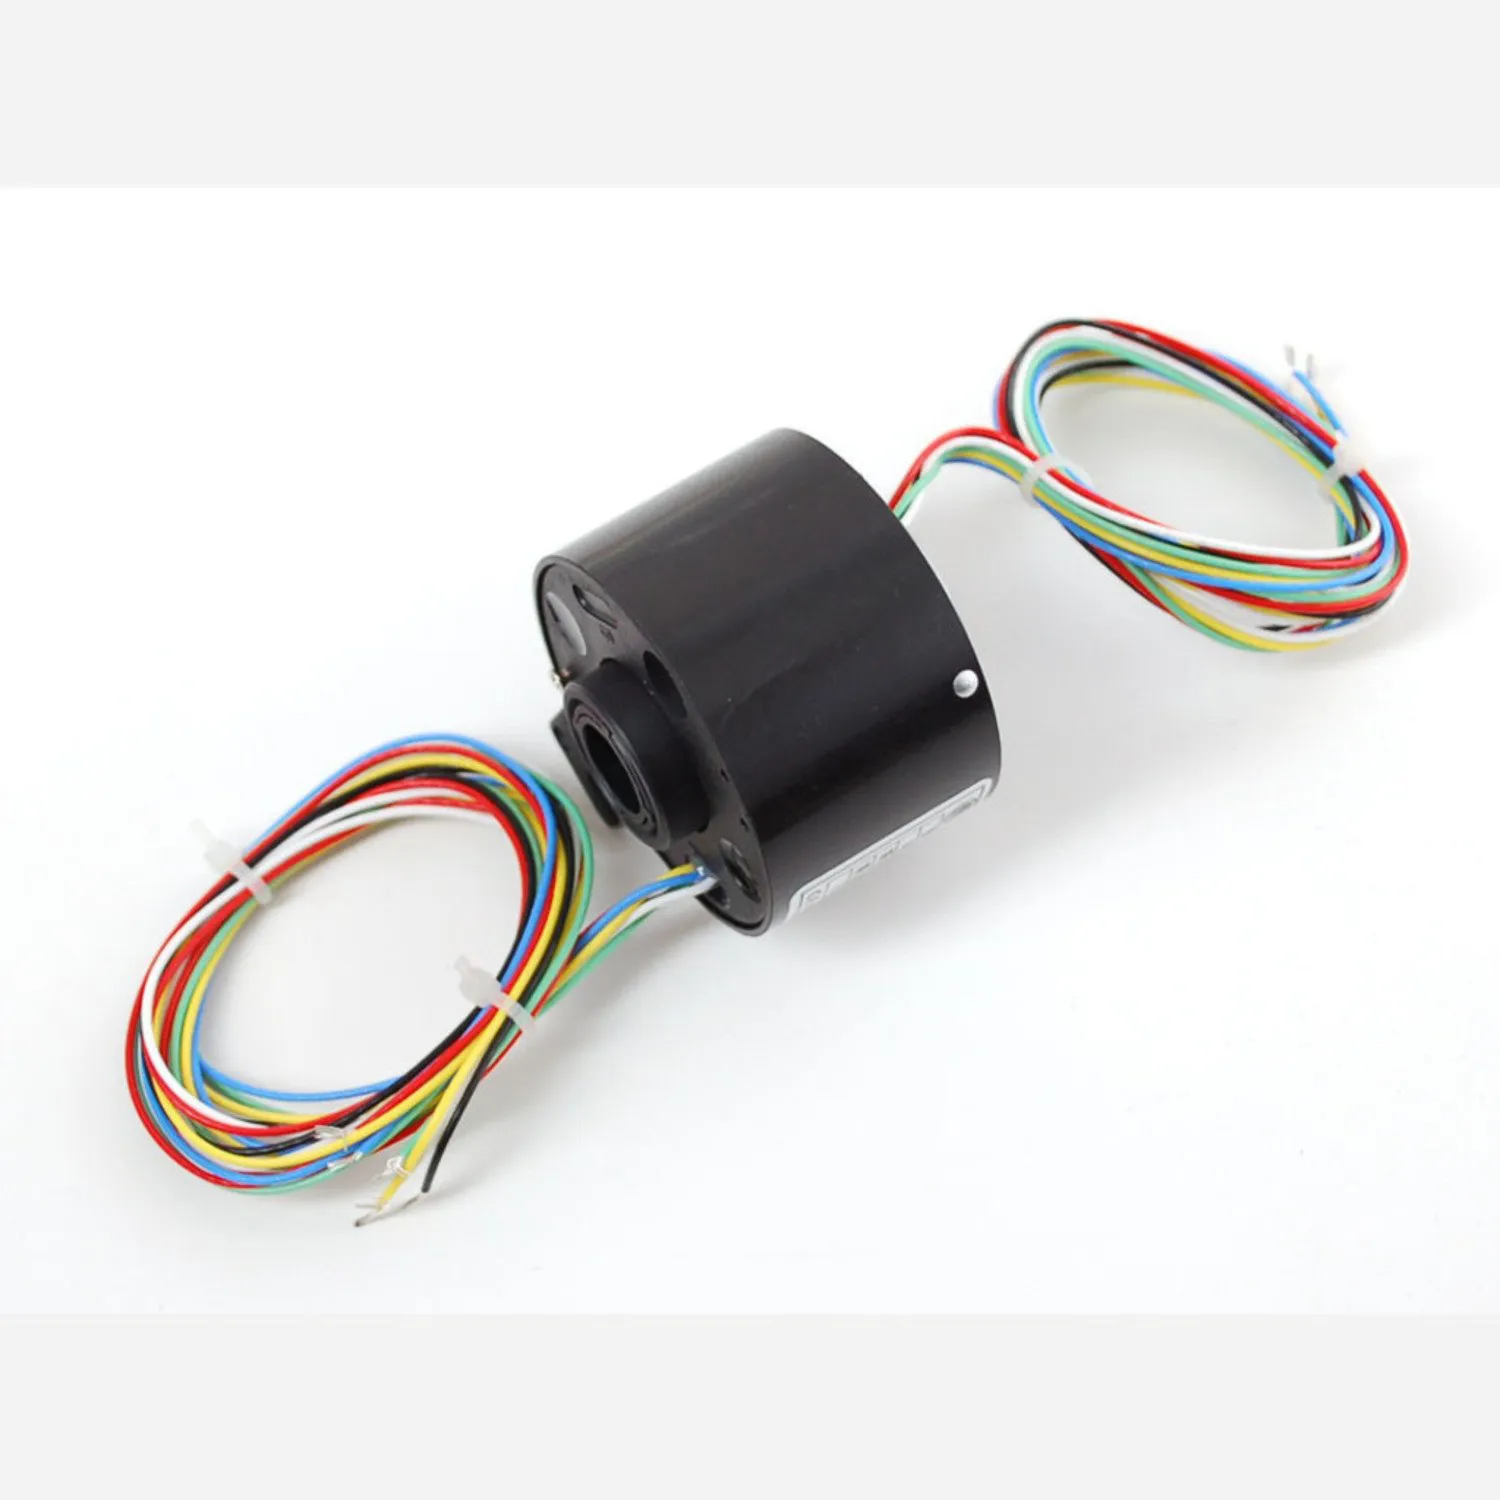 Photo of Toroid Slip Ring - 2.1 OD 1/2 ID, 6 wires, max 240V @ 5A